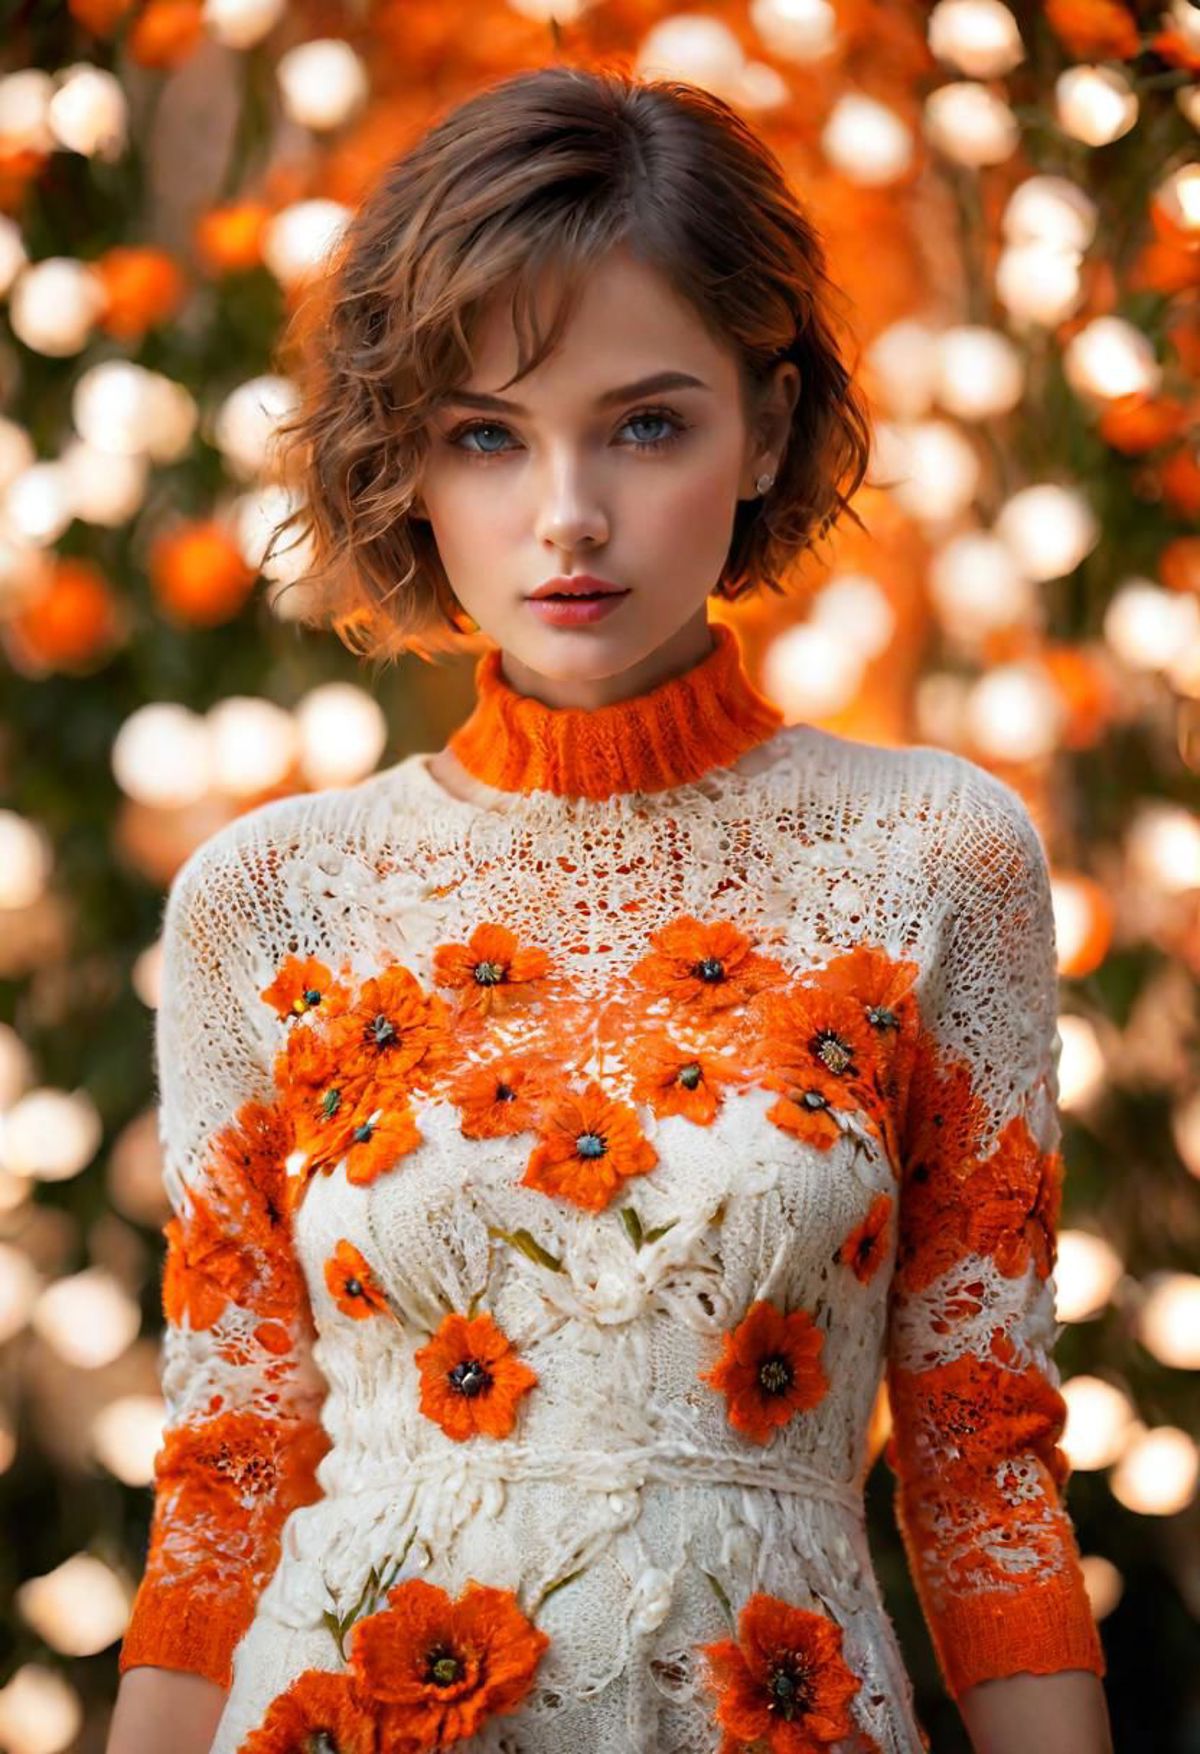 A young woman wearing a lace top with orange flowers and a knit sweater poses for a close-up shot.